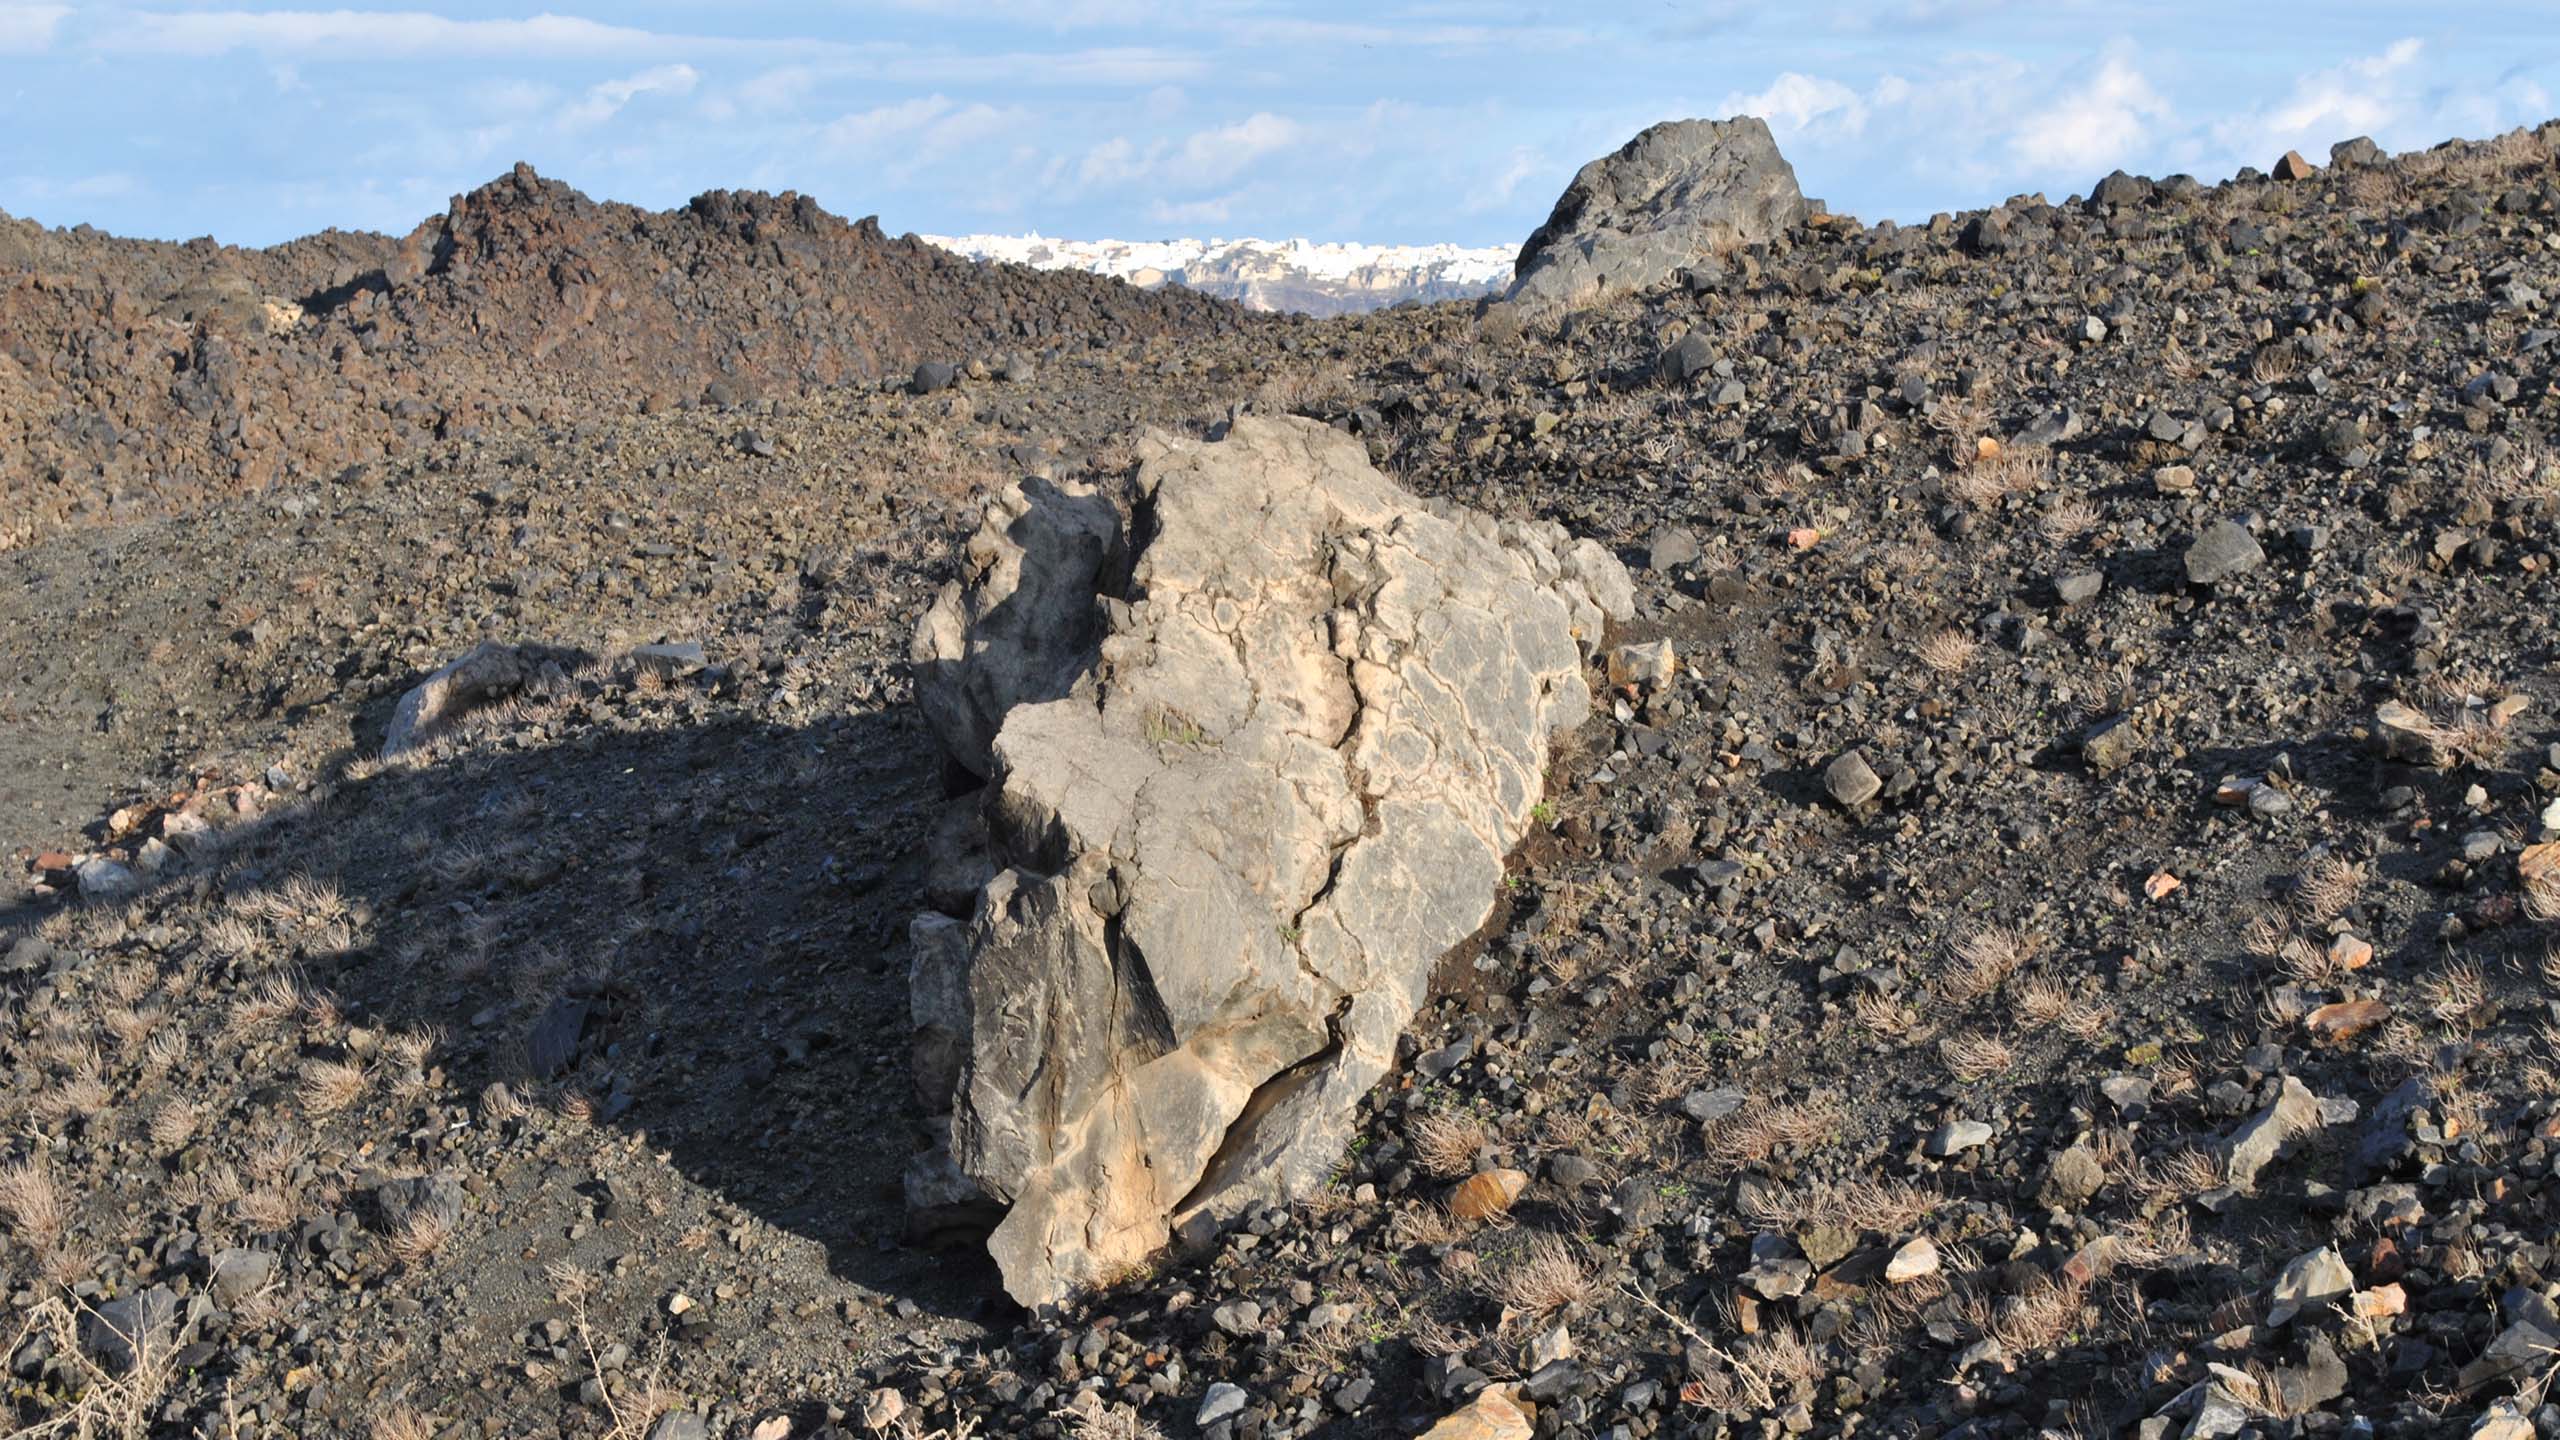 Emerging lava: A lava block stands out on the surface of the volcano